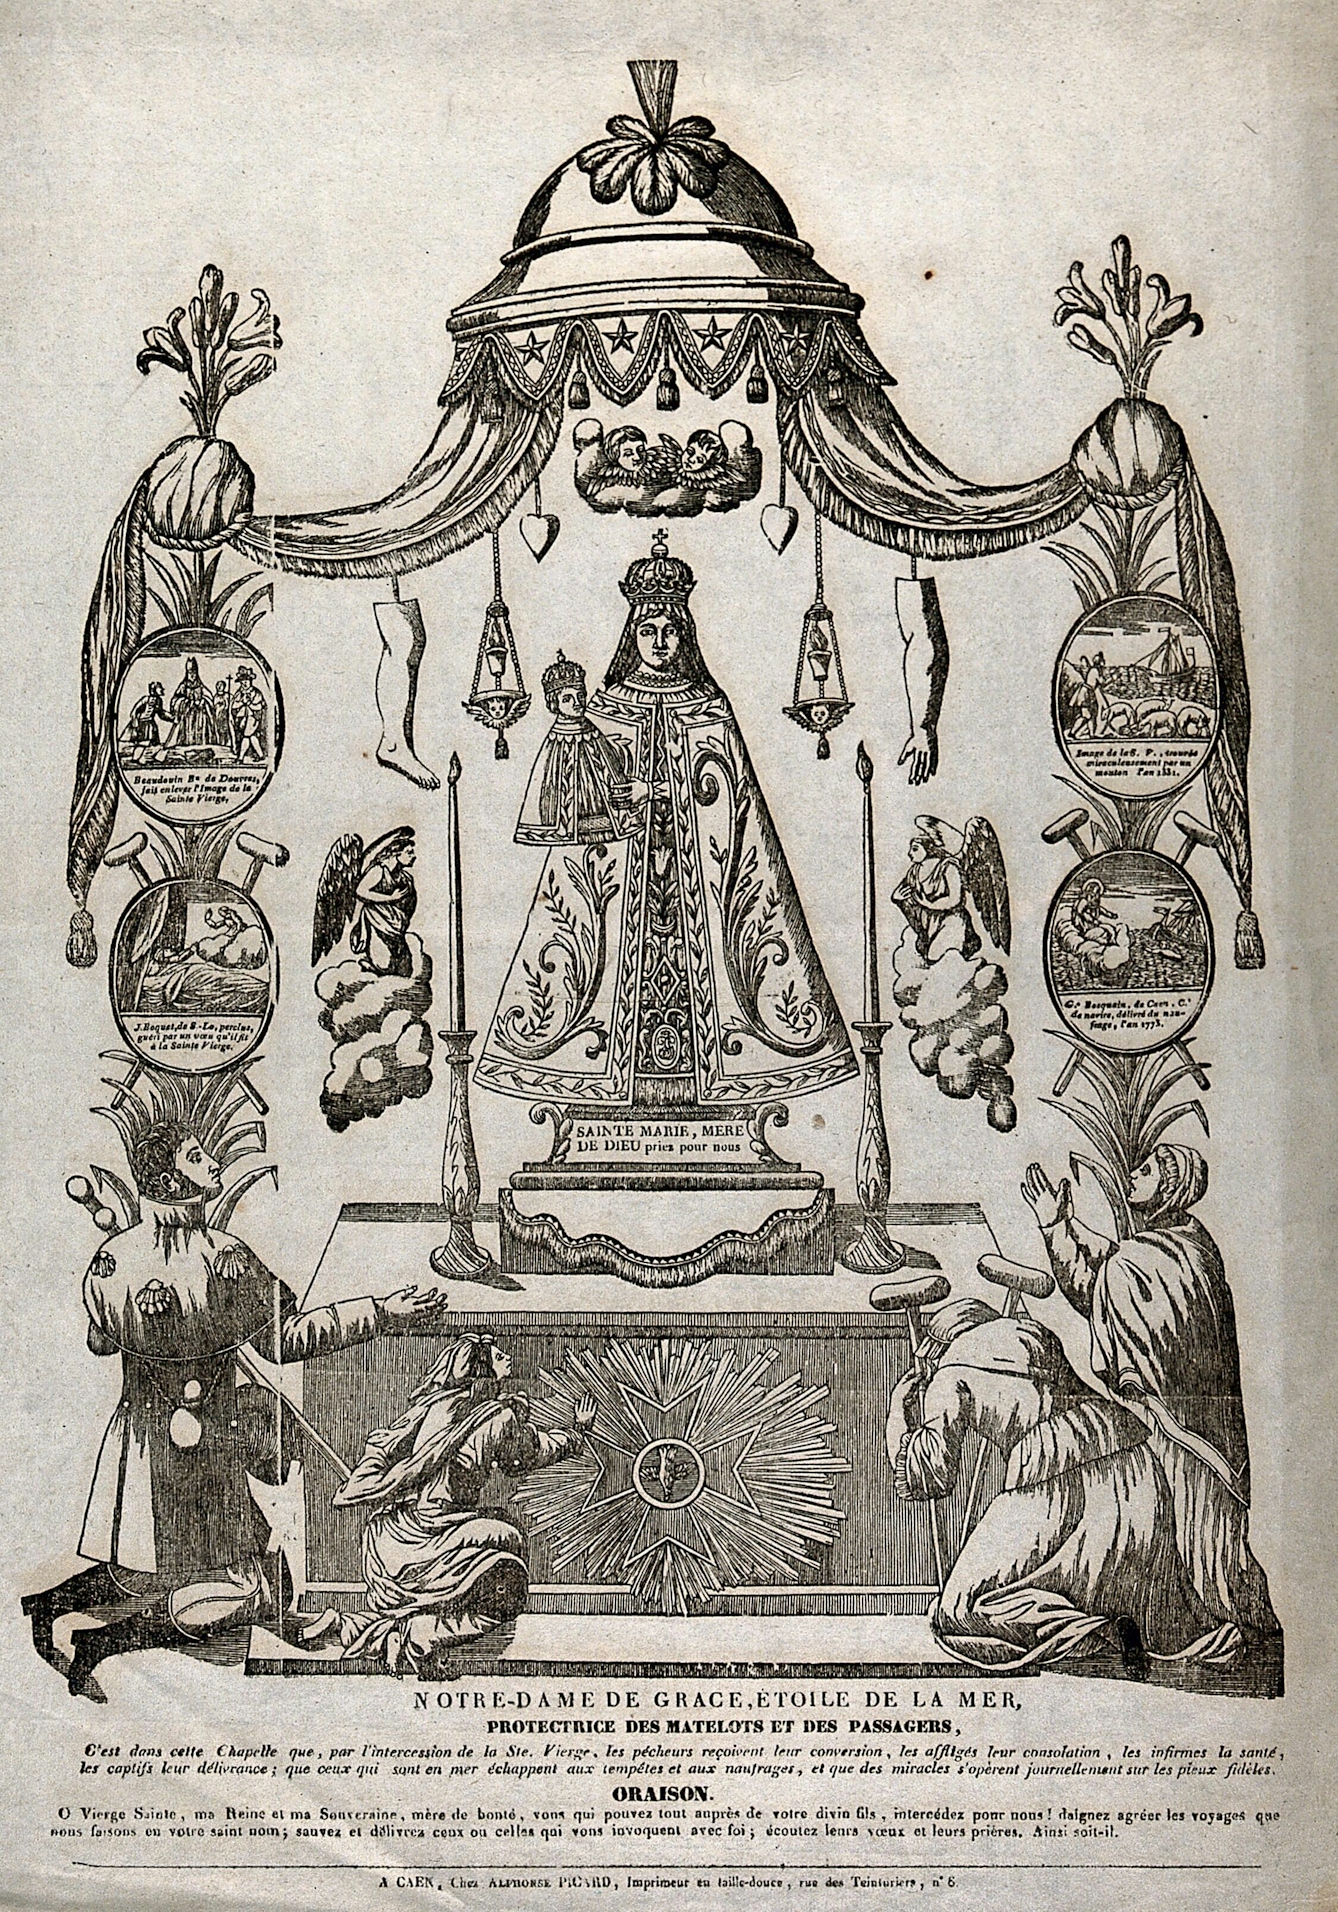 Woodcut displaying a statue of The Virgin, Star of the Sea at Caen. The statue is displayed in the centre and surrounding her are various motifs, hanging from a covering over her head. These include two angels, a leg, an arm and several hearts. Next to the canopy cover there are several people kneeling and worshipping her, including a man who has two crutches. Along the bottom of the image there is text in French. 